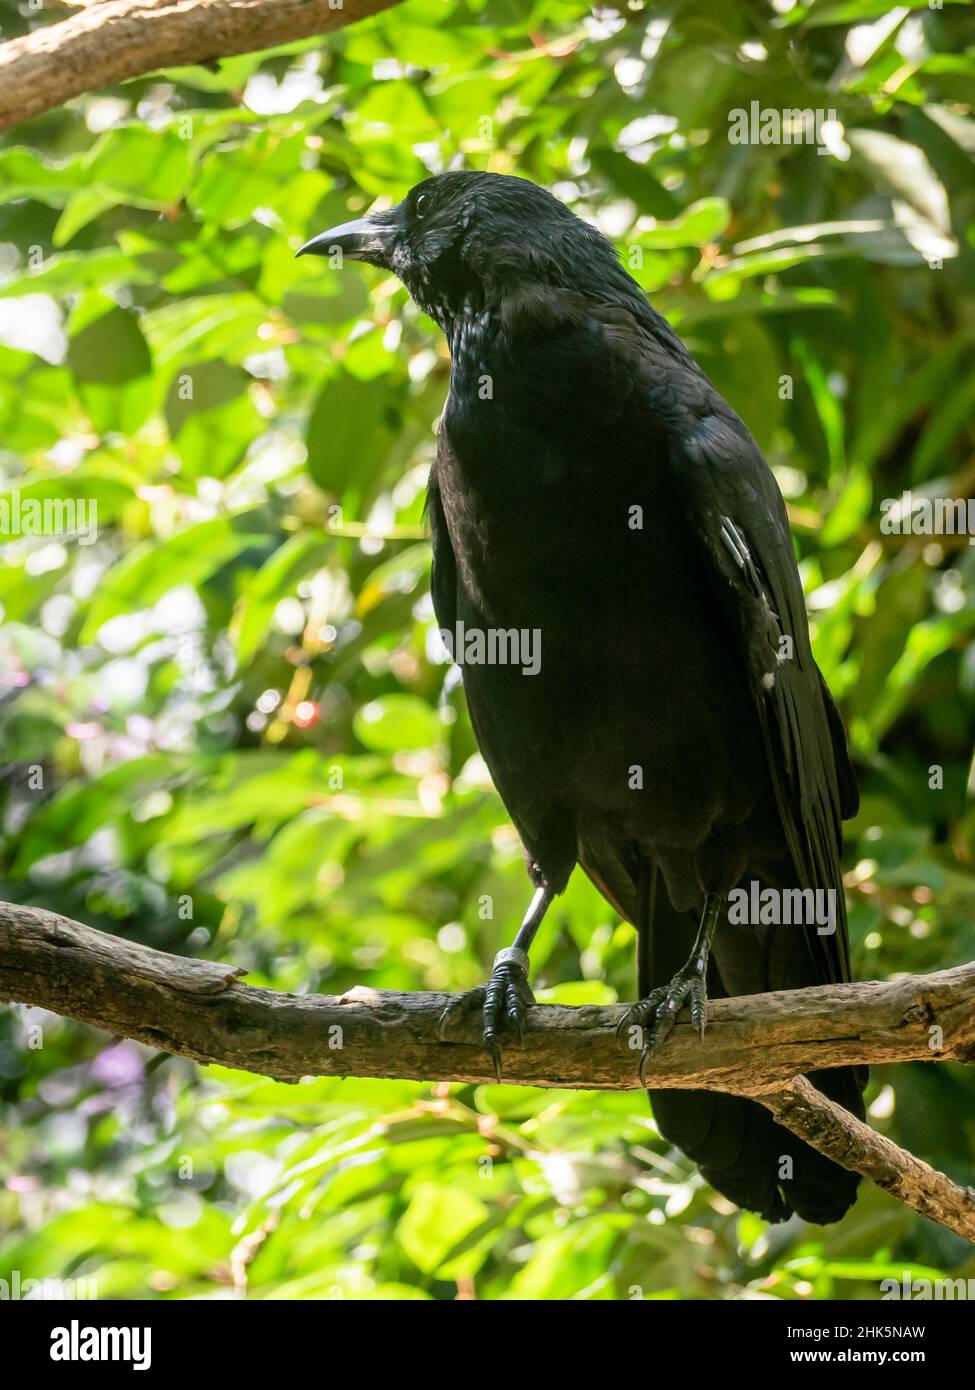 Crow on a branch among the trees with a background of green leaves Stock Photo